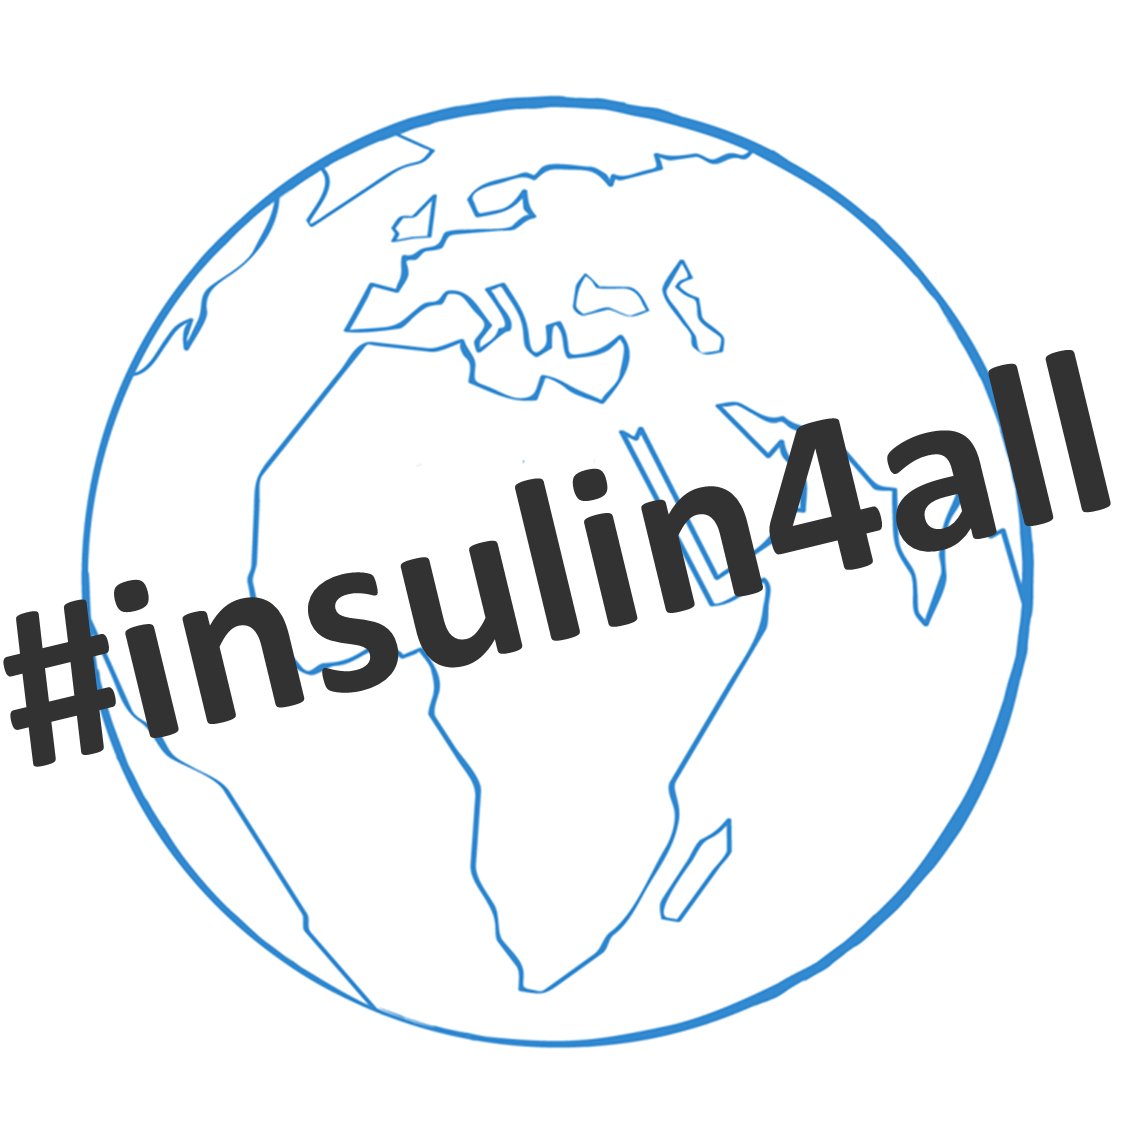 #insulin4all is a campaign of @t1international that unites the global #doc community to push for access to diabetes supplies, care, & treatment for everyone.